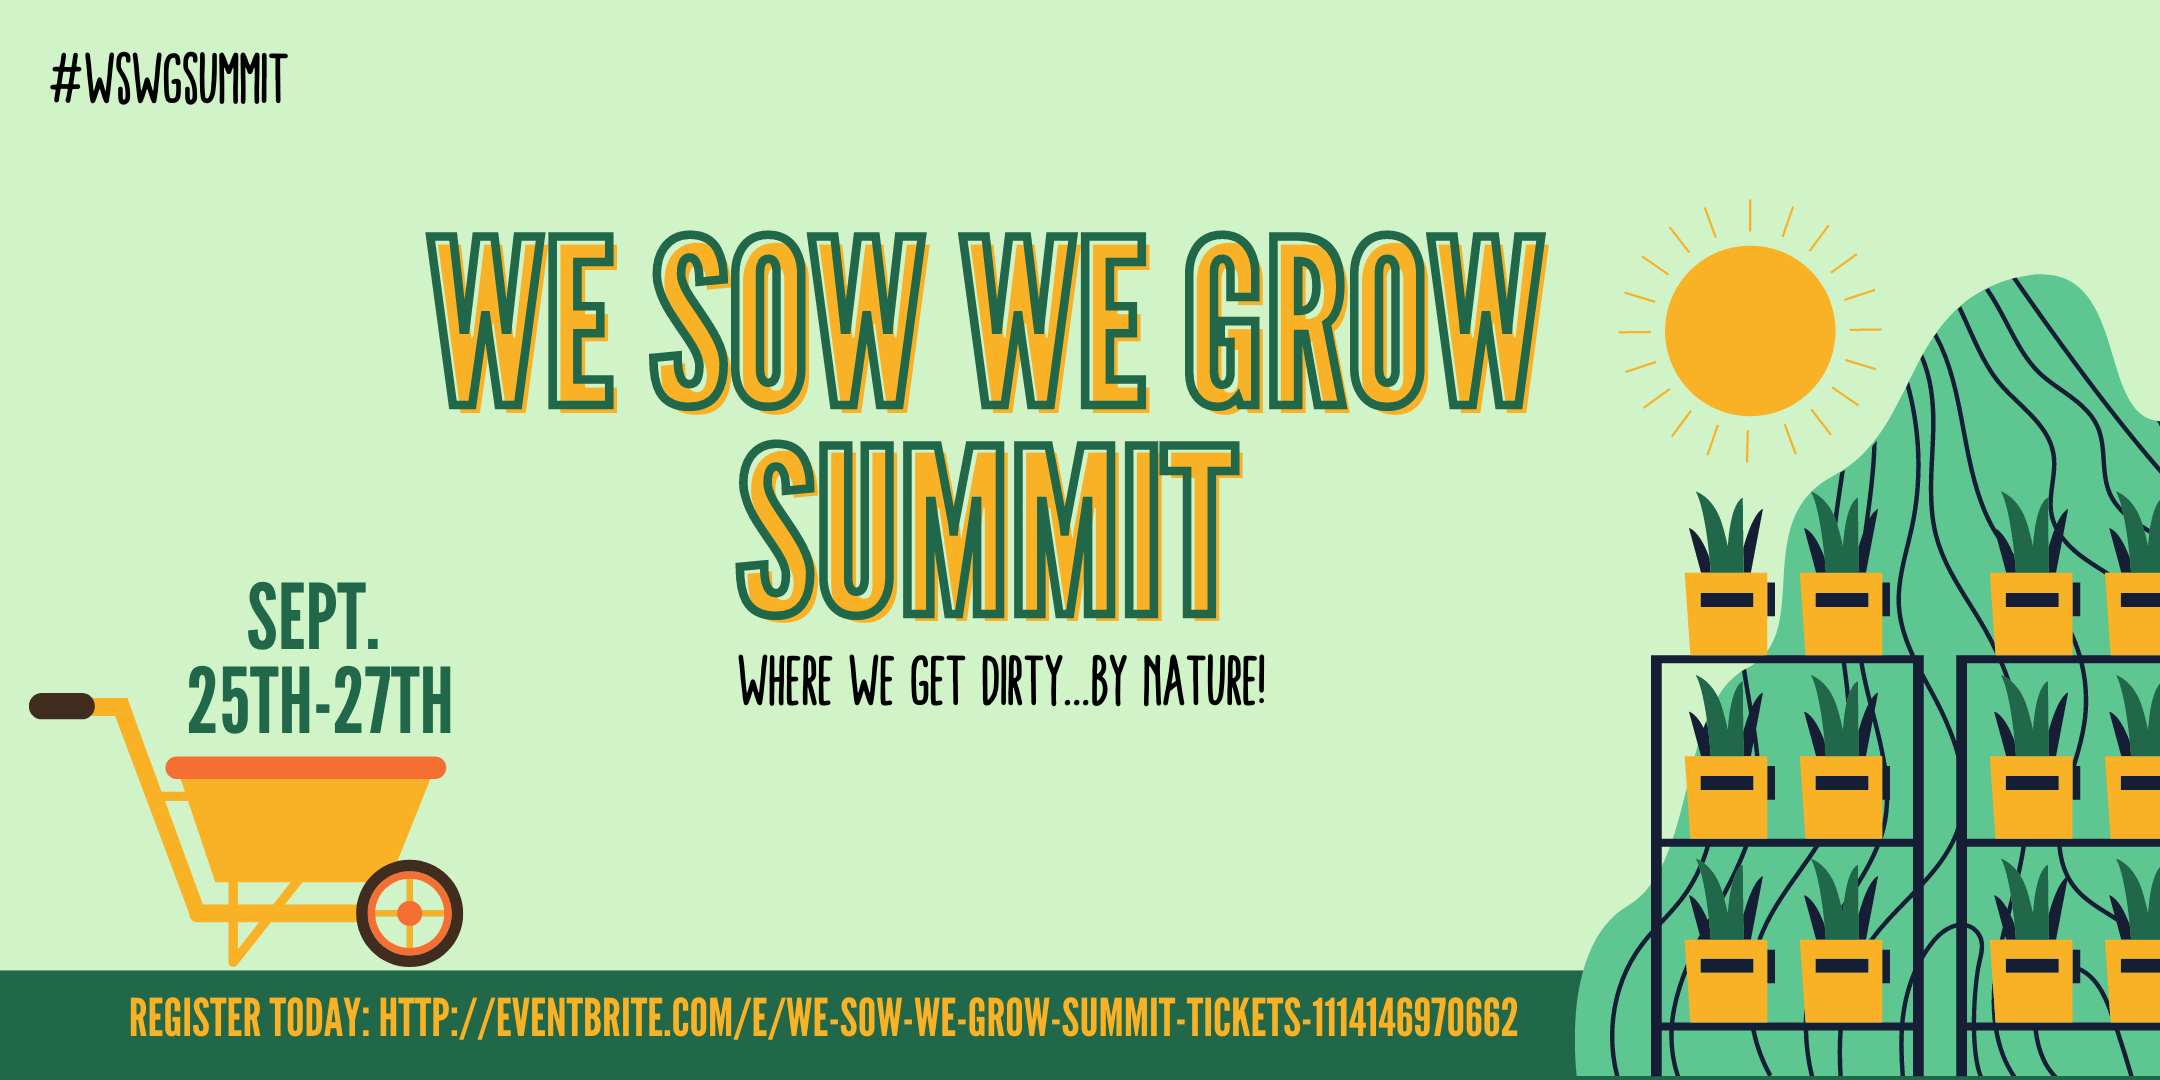 Second Line Up of Speakers for We Sow We Grow Summit